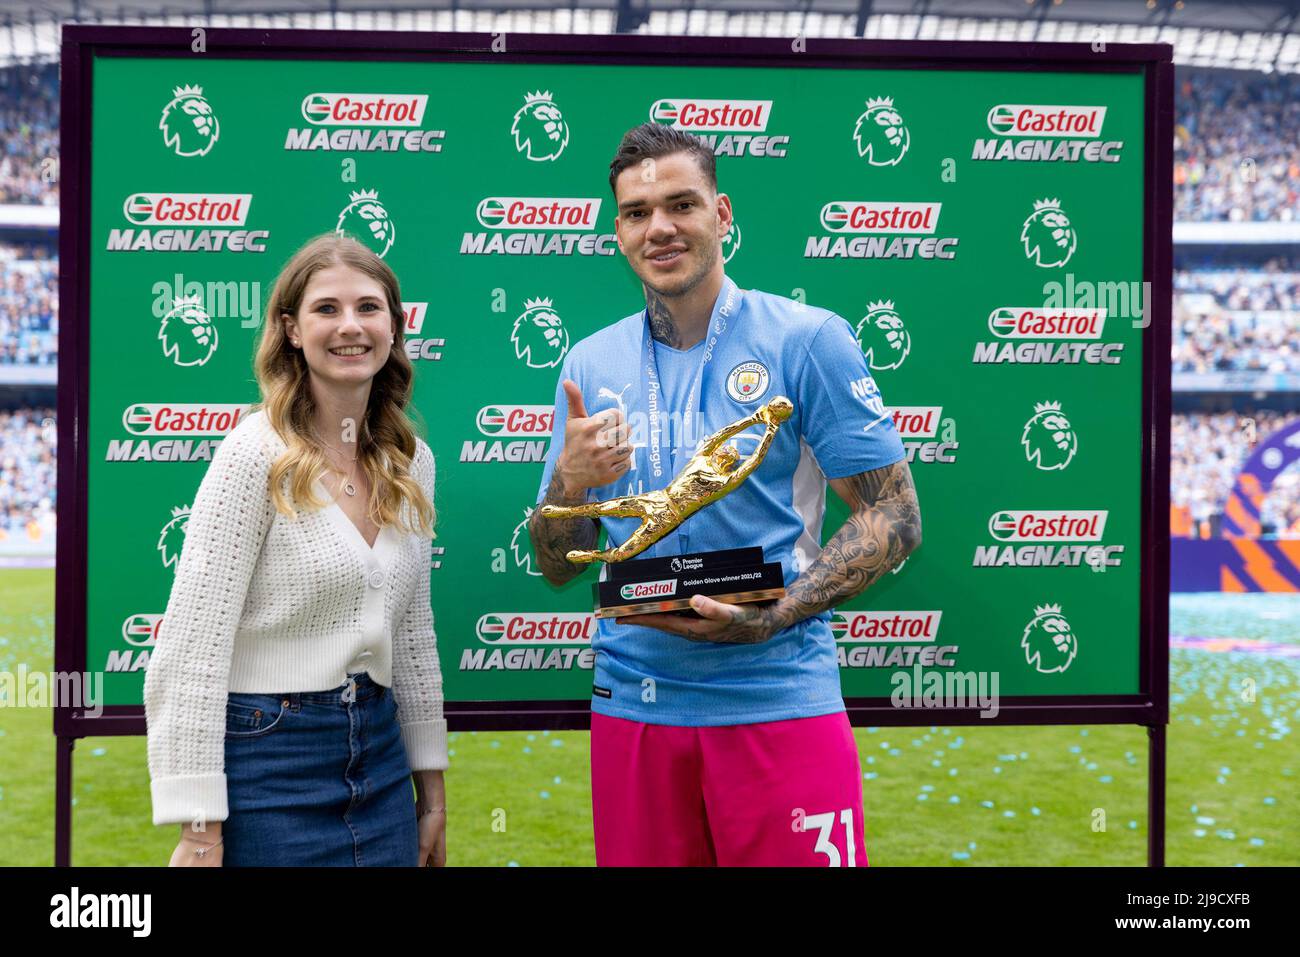 Manchester City's Ederson is presented with the Premier League